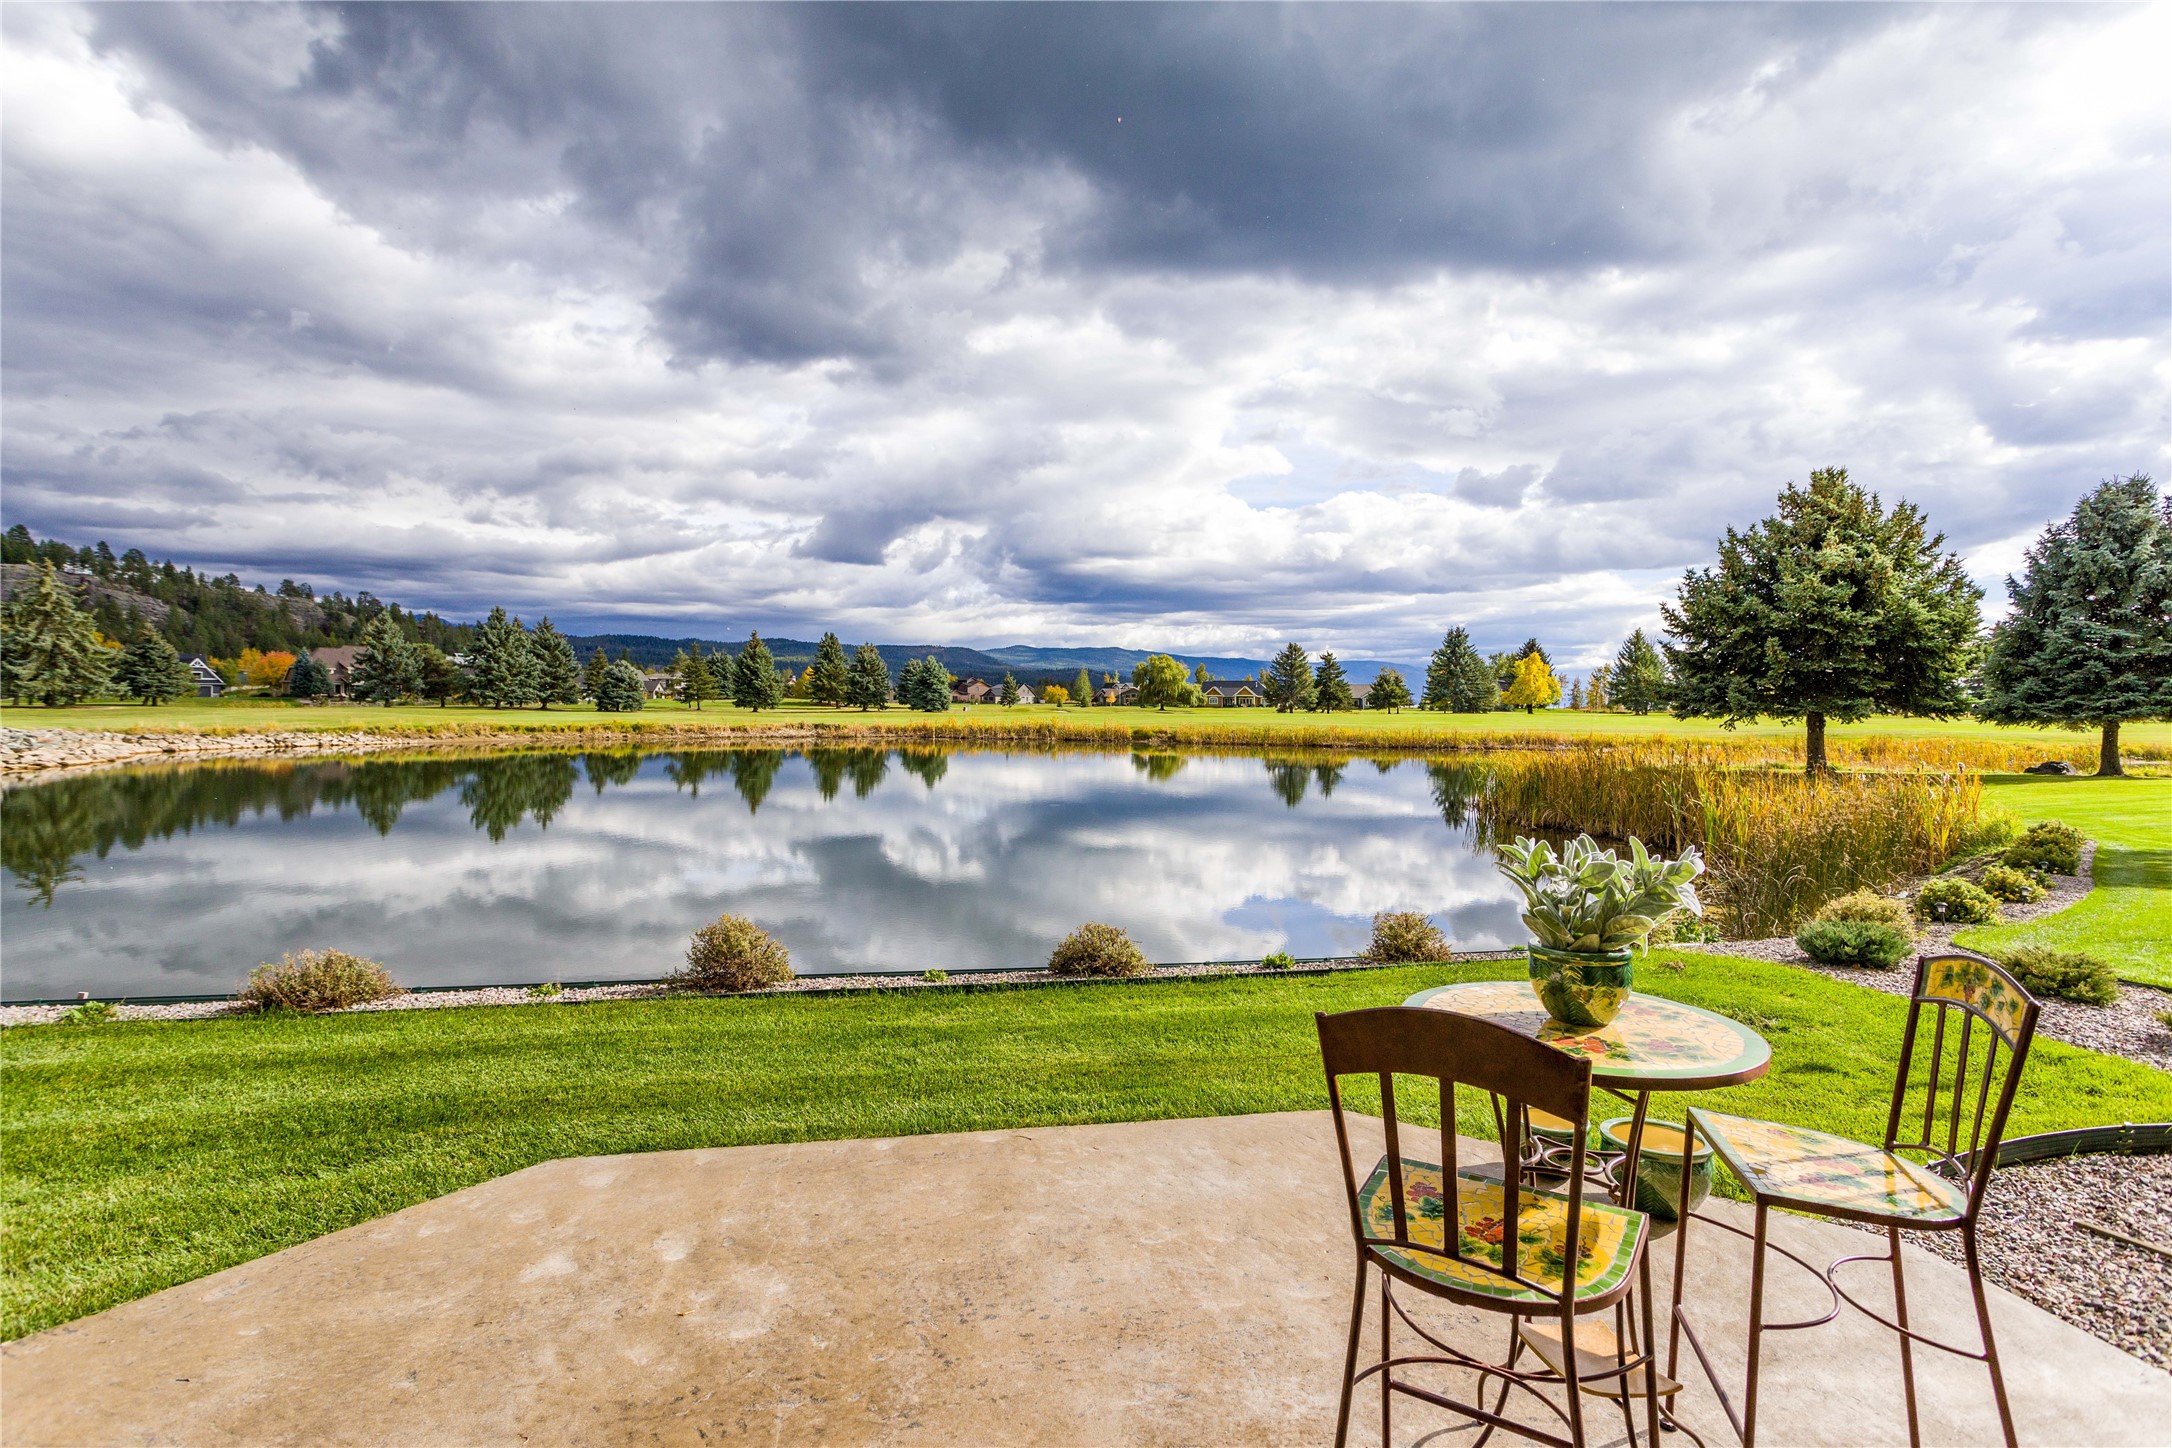 A wonderful two-story townhome overlooking the pond & the 8th fairway on the Osprey 9 at the Eagle Bend golf course. The patio & guest room balcony capture the views of the Mission Mountains to the southeast & Flathead Lake to the south. The spacious kitchen connects to the dining room, which opens to the comfortable living room with a cozy corner fireplace & expansive sliding doors to the patio bordering the pond. The main floor consists of the primary suite with soaking tub, separate shower & walk-in closet; the laundry room is connected to the over-sized double garage & convenient to the adjoining powder room. The upper-level features two guest suites, one with a viewing balcony & the other with a huge storage closet, separated by the loft office.  Most of the furniture can stay. Contact Tom Brown 406.471.0630 or Katie Brown 406.253.3222 or your real estate professional. The residence is located only minutes from the Eagle Bend clubhouse, the Eagle Bend Yacht Harbor, the Montana Athletic Club & the quaint village of Bigfork. Glacier International Airport & Glacier National Park are within an hour away.